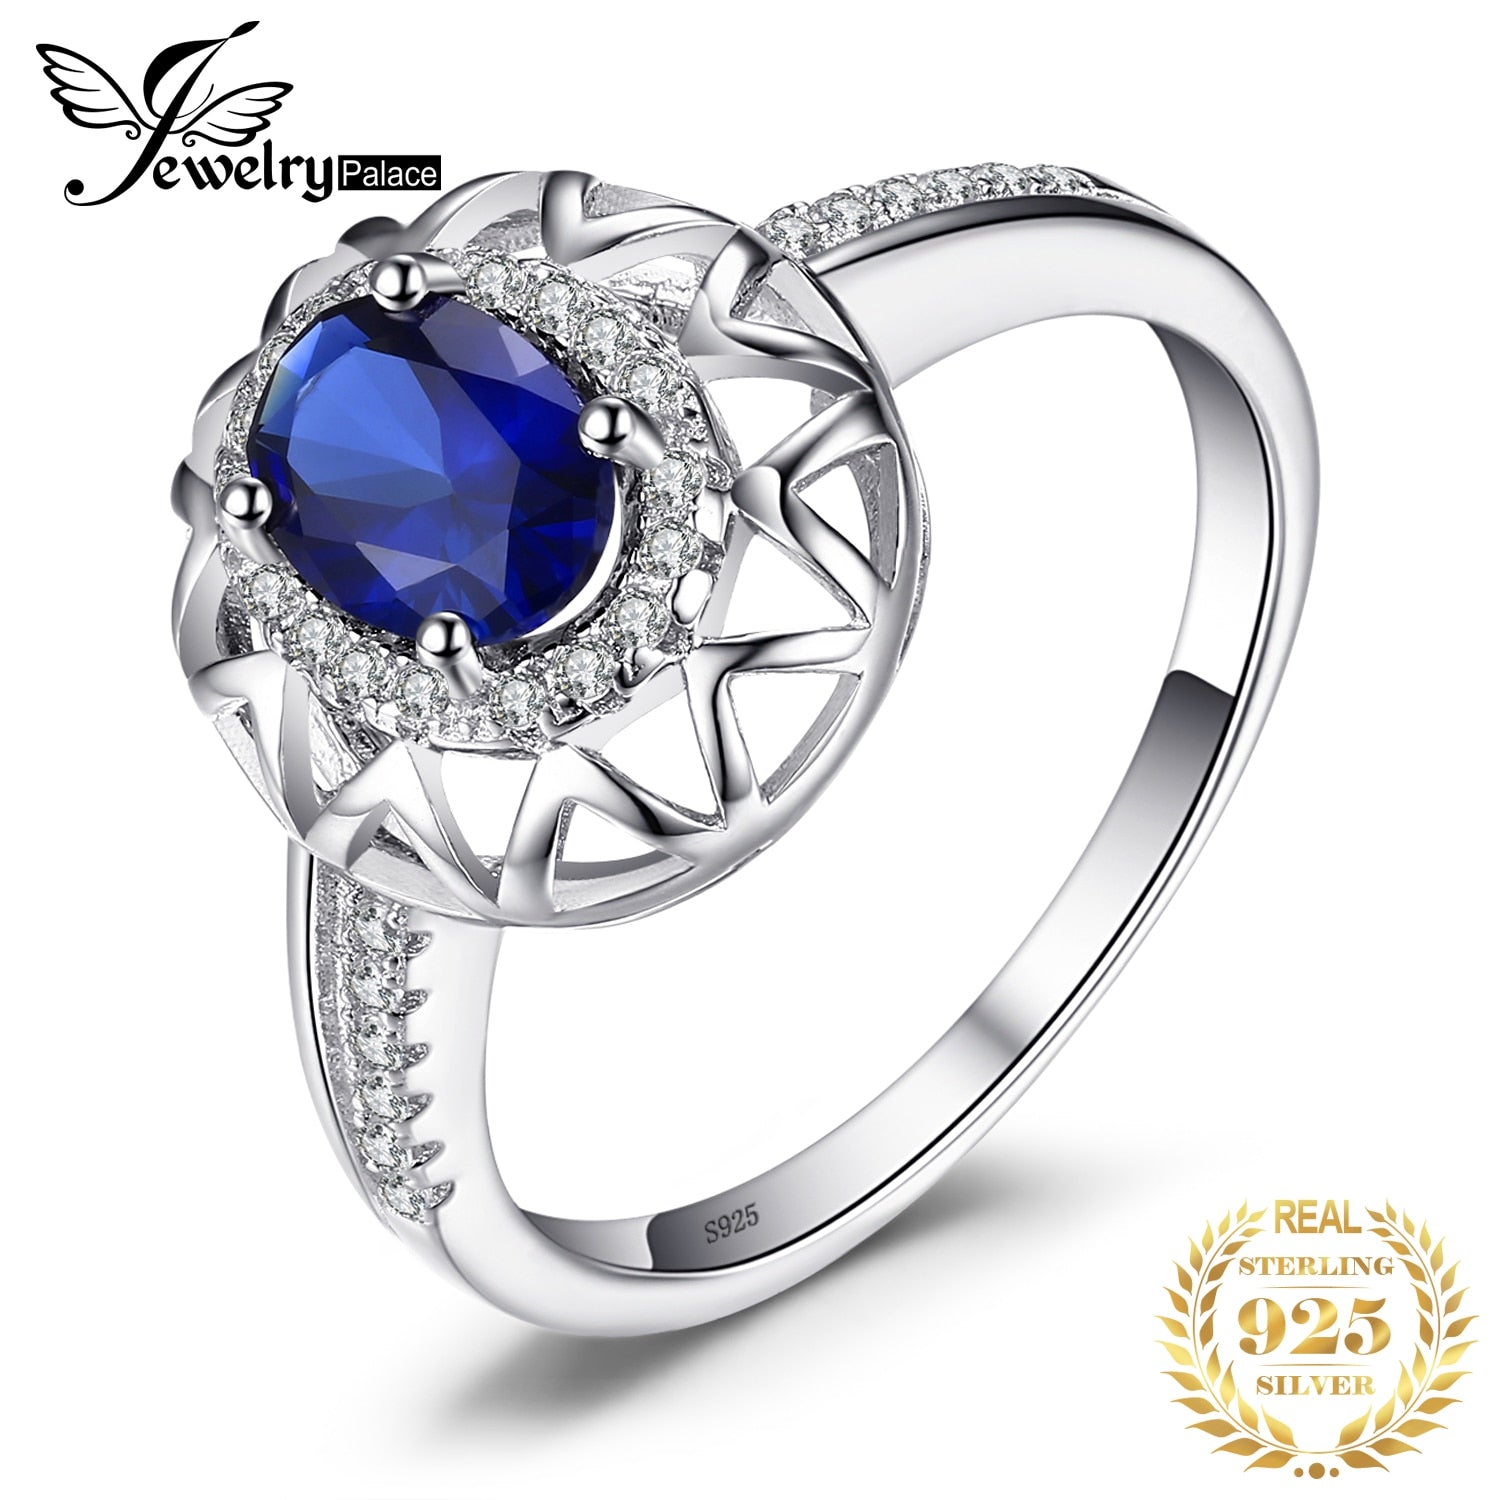 JewelryPalace Created Blue Sapphire 925 Sterling Silver Rings for Women Fashion Statement Gemstone Jewelry Halo Engagement Ring China